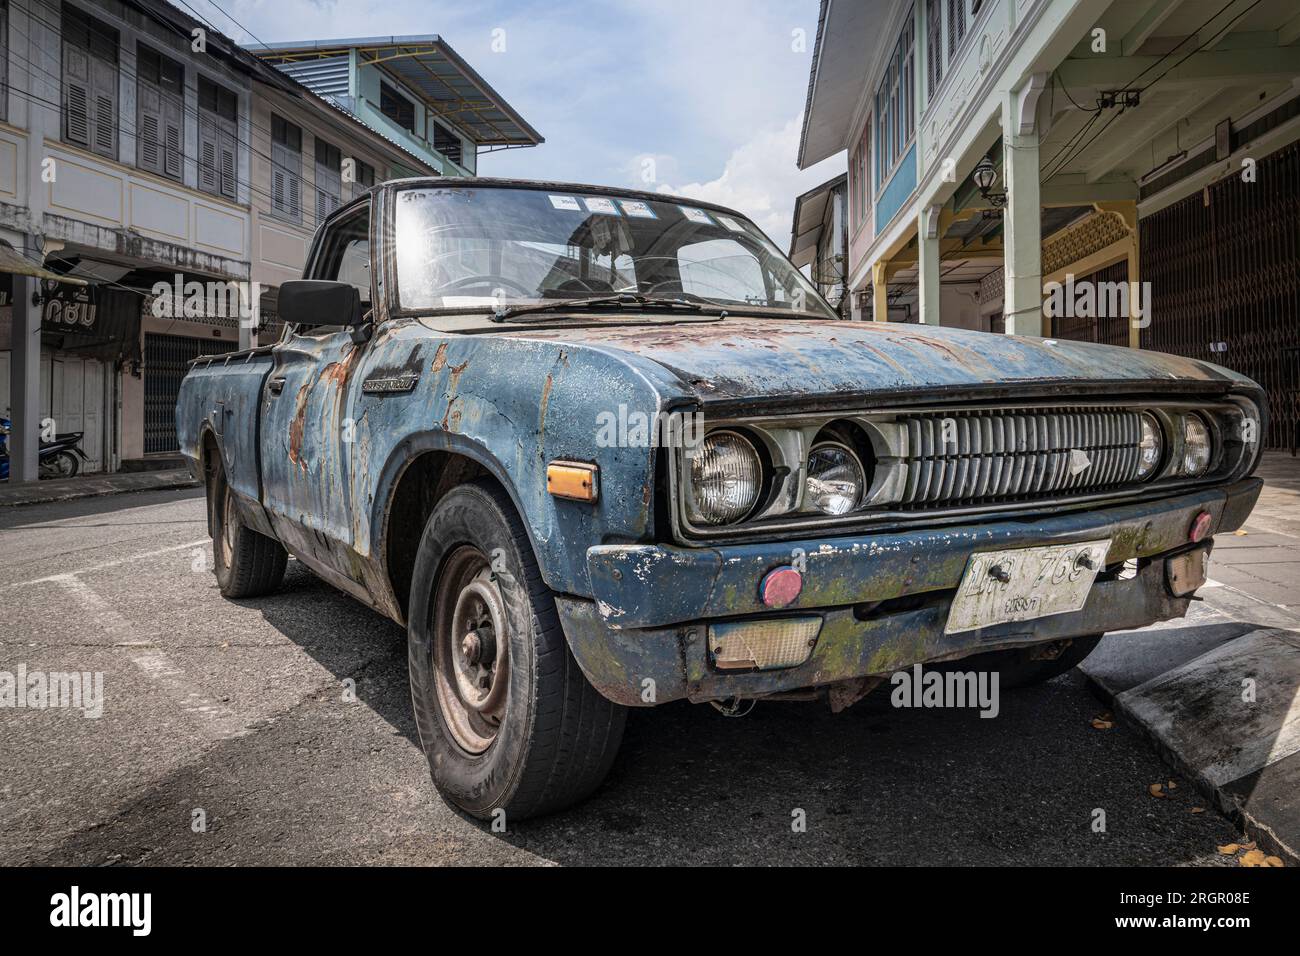 An old, battered and rusty Japanese pickup truck DATSUN close-up on the street in Thailand, in the old town of Takua Pa. Takua Pa Thailand, Phang Nga Stock Photo